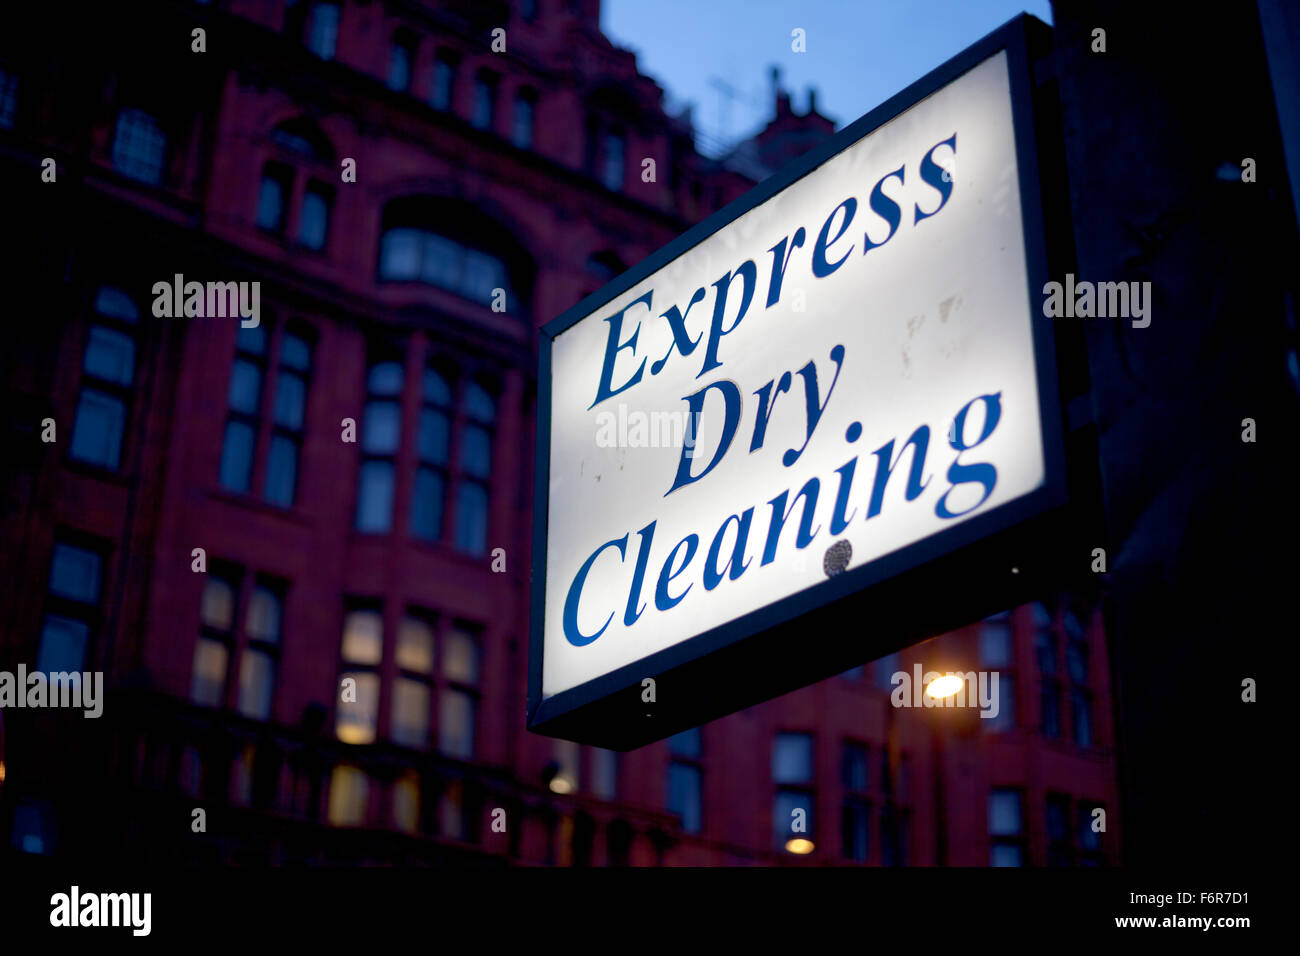 Shop sign Express Dry Cleaning Stock Photo